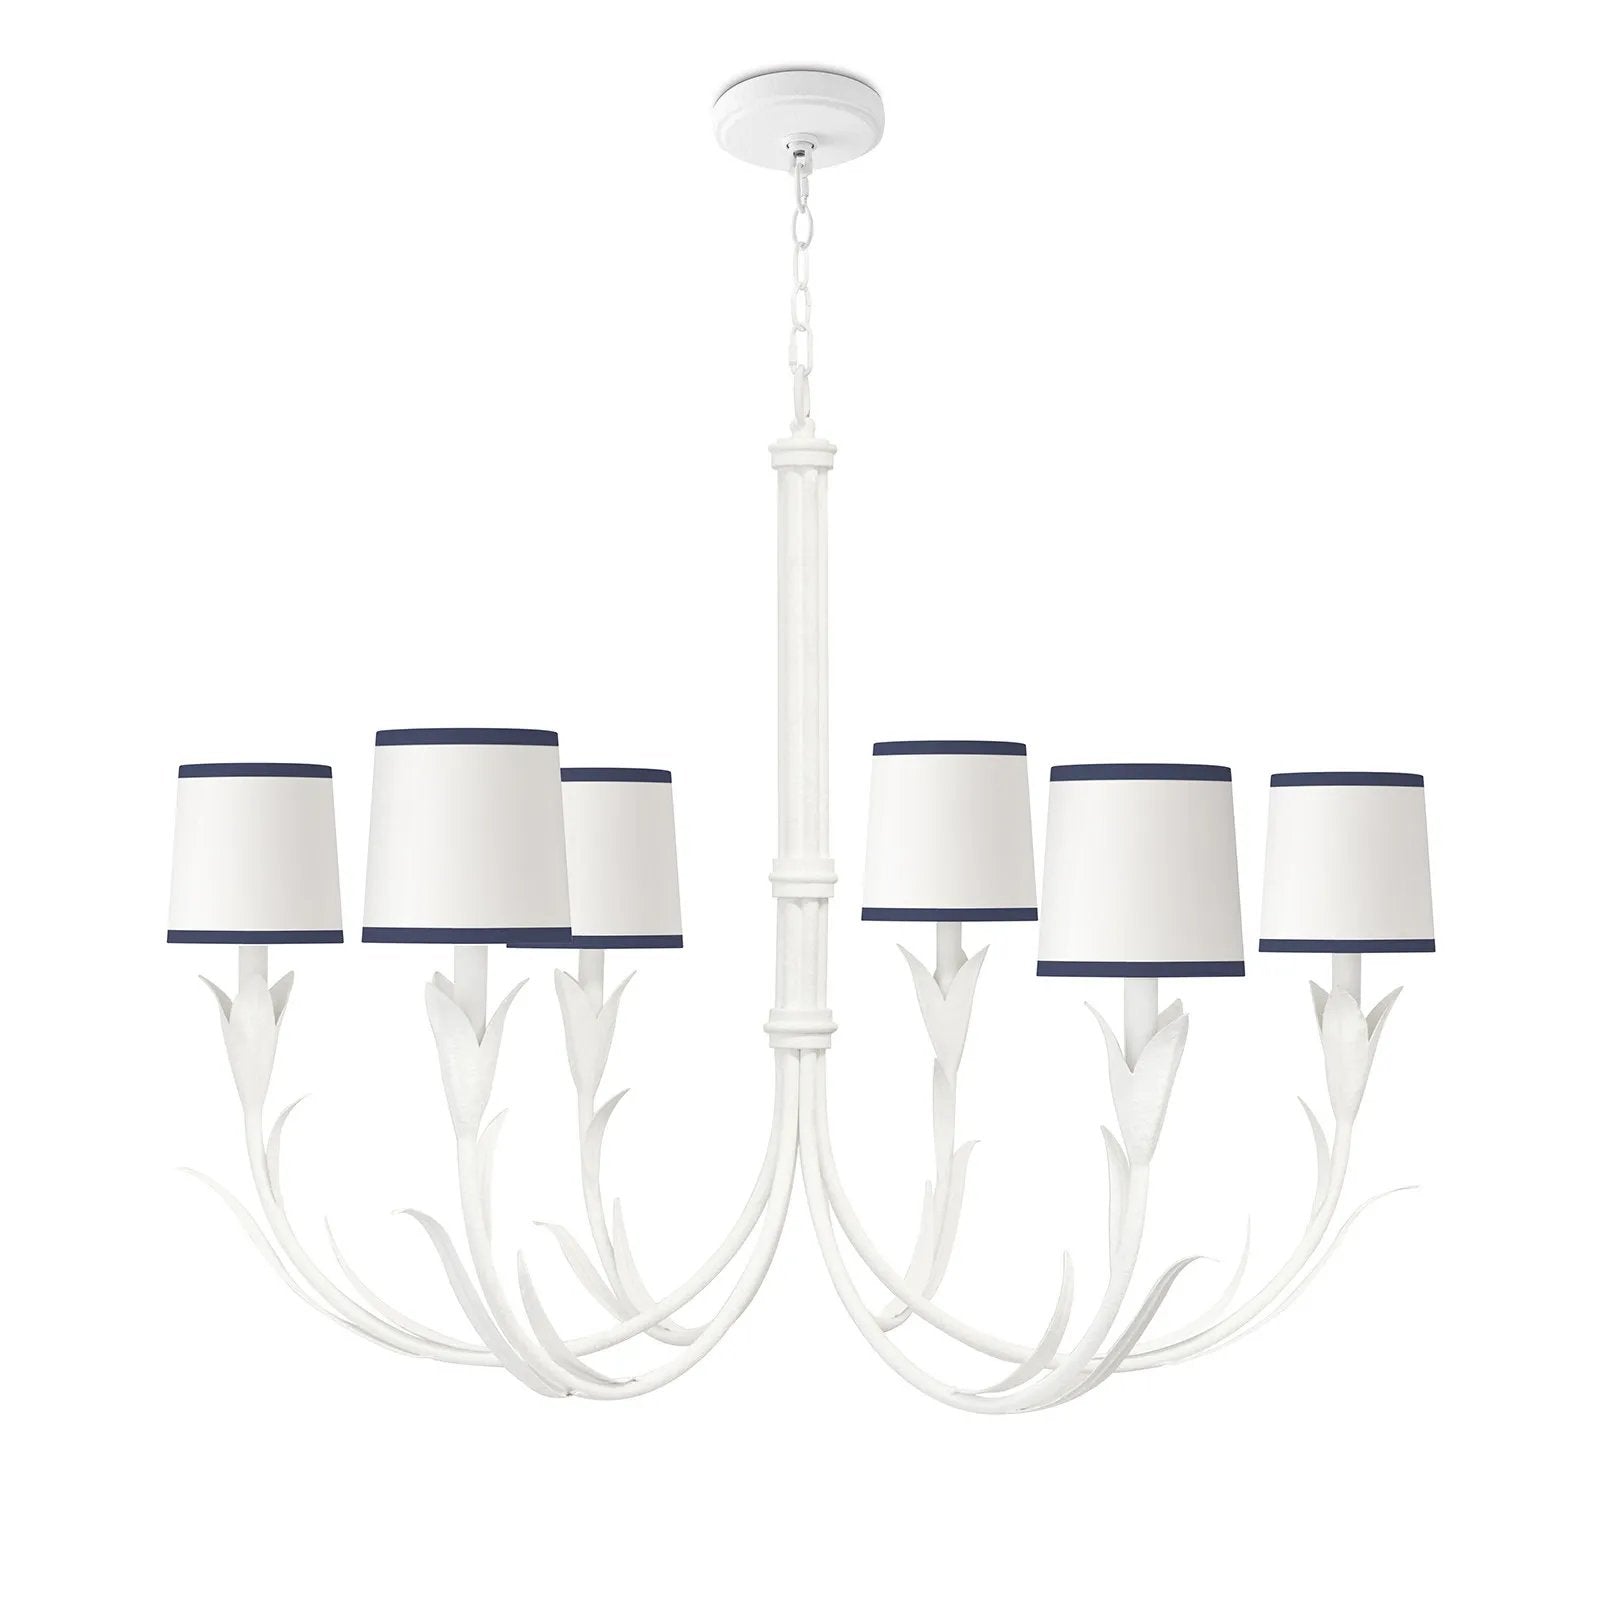 With its botanical influence and white finish, the River Reed Chandelier is the ideal fixture for any traditional living space. Six reeded arms reach upward toward navy shades, joined in the middle of the fixture with two detailed bands. This six-light fixture is suspended on an elegant chain, adorning a room with organic, natural glamour. Amethyst Home provides interior design, new home construction design consulting, vintage area rugs, and lighting in the Calabasas metro area.